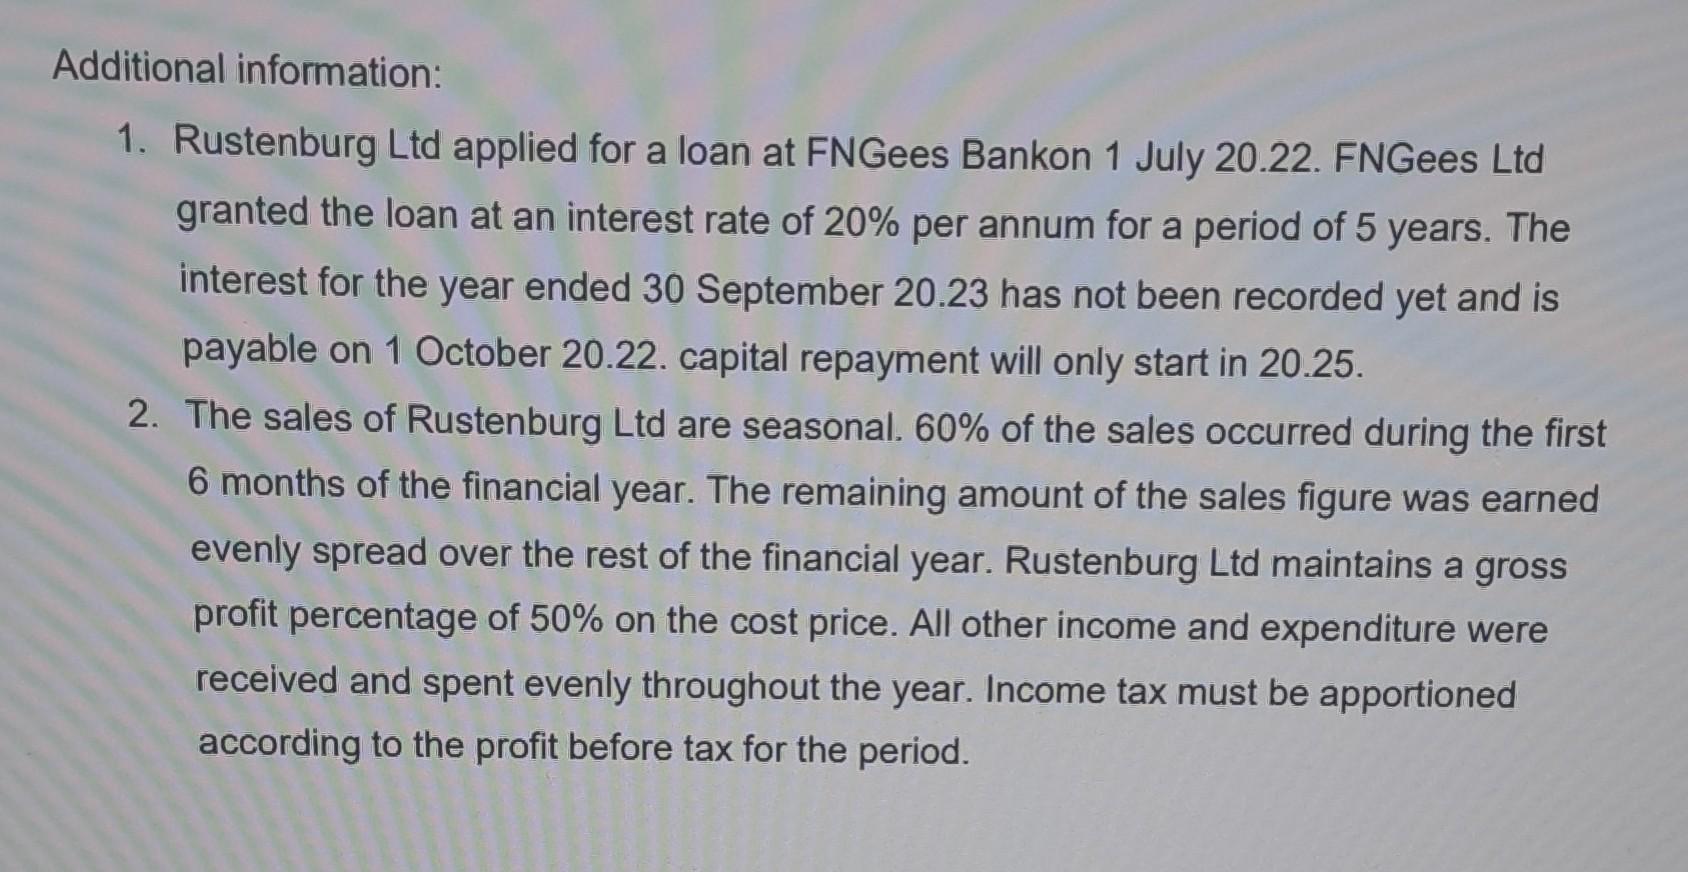 Additional information: 1. Rustenburg Ltd applied for a loan at FNGees Bankon 1 July 20.22. FNGees Ltd